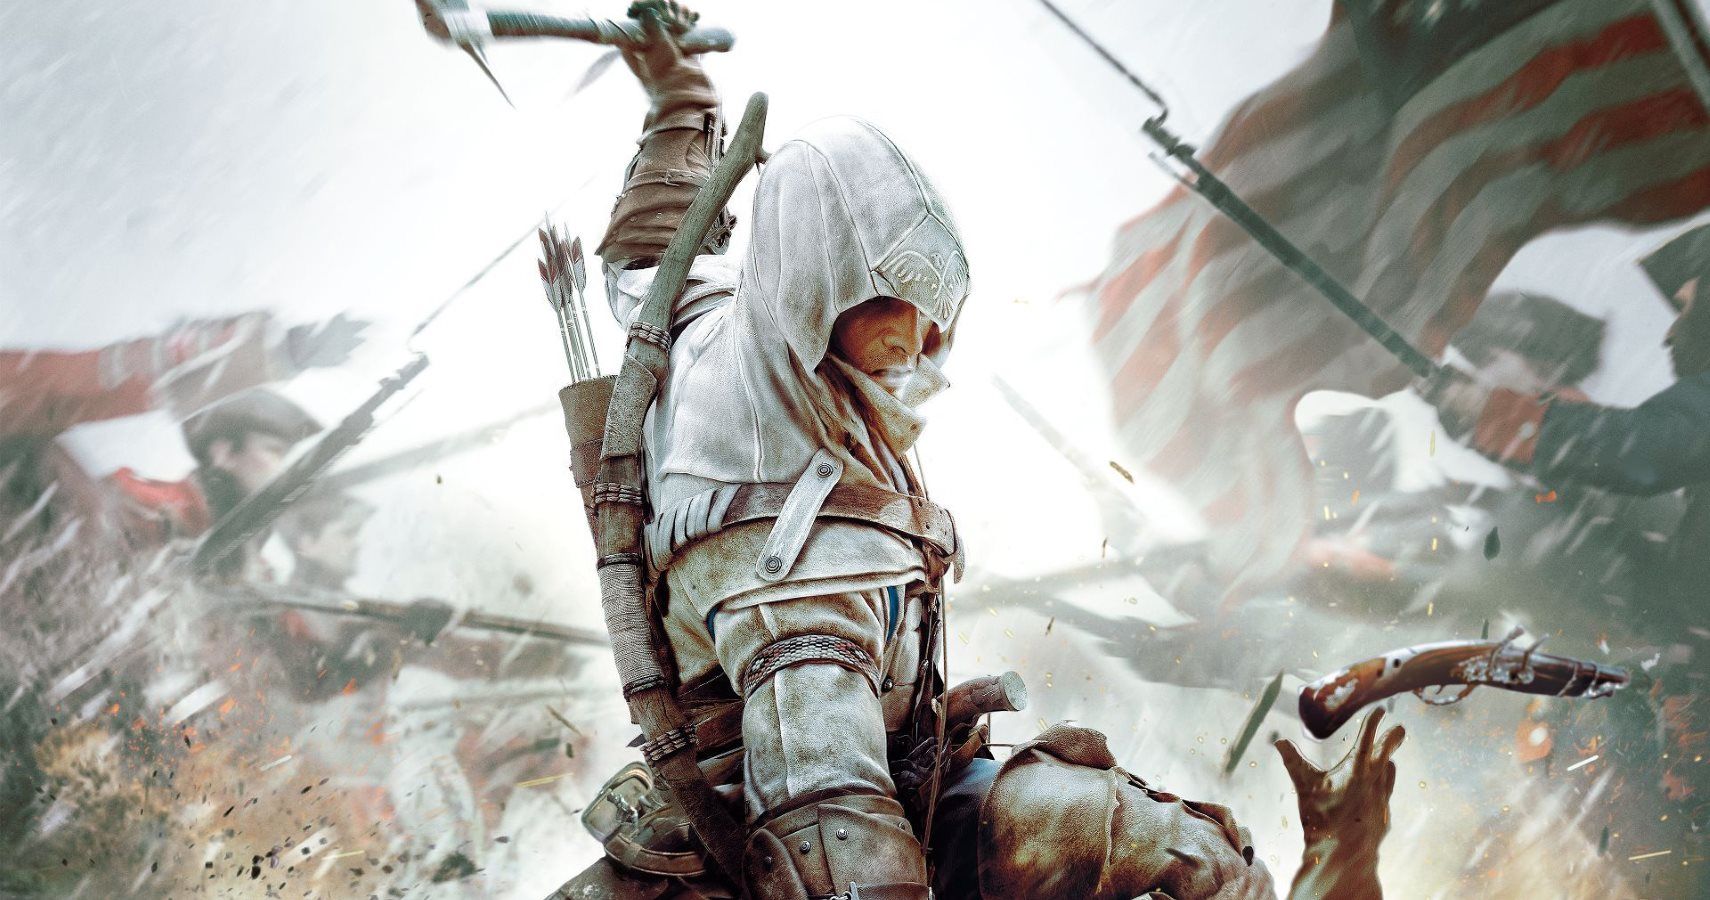 Director Of Assassin's Creed 3 Offers What He'd Change About The Game With The Benefit Of Hindsight